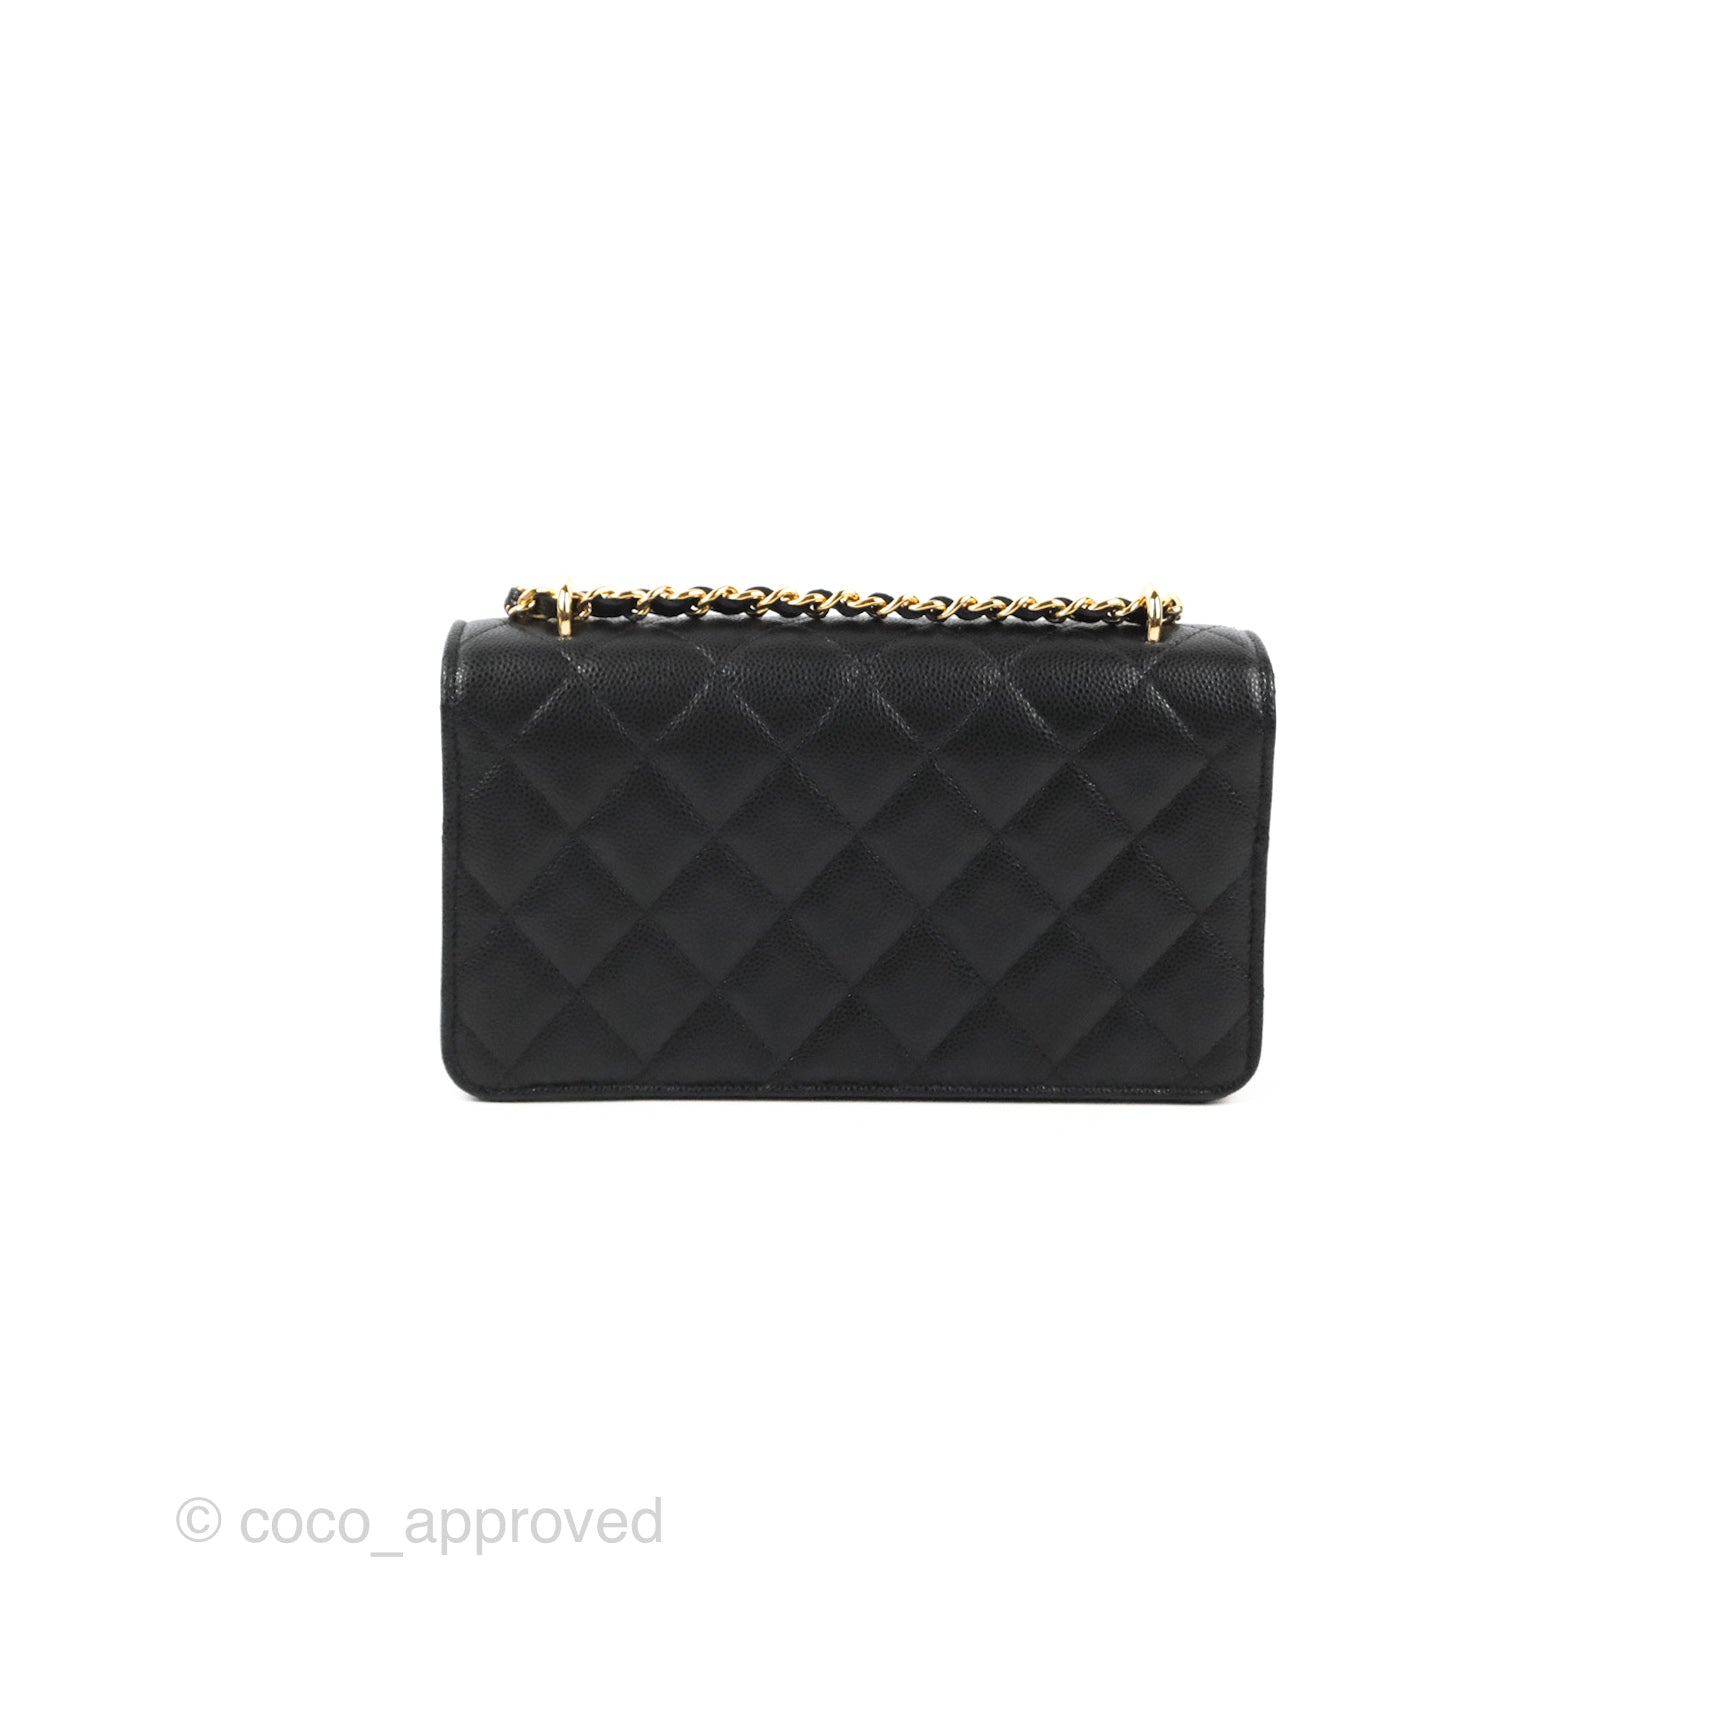 With dust bag] Second-hand Chanel black caviar leather WOC long